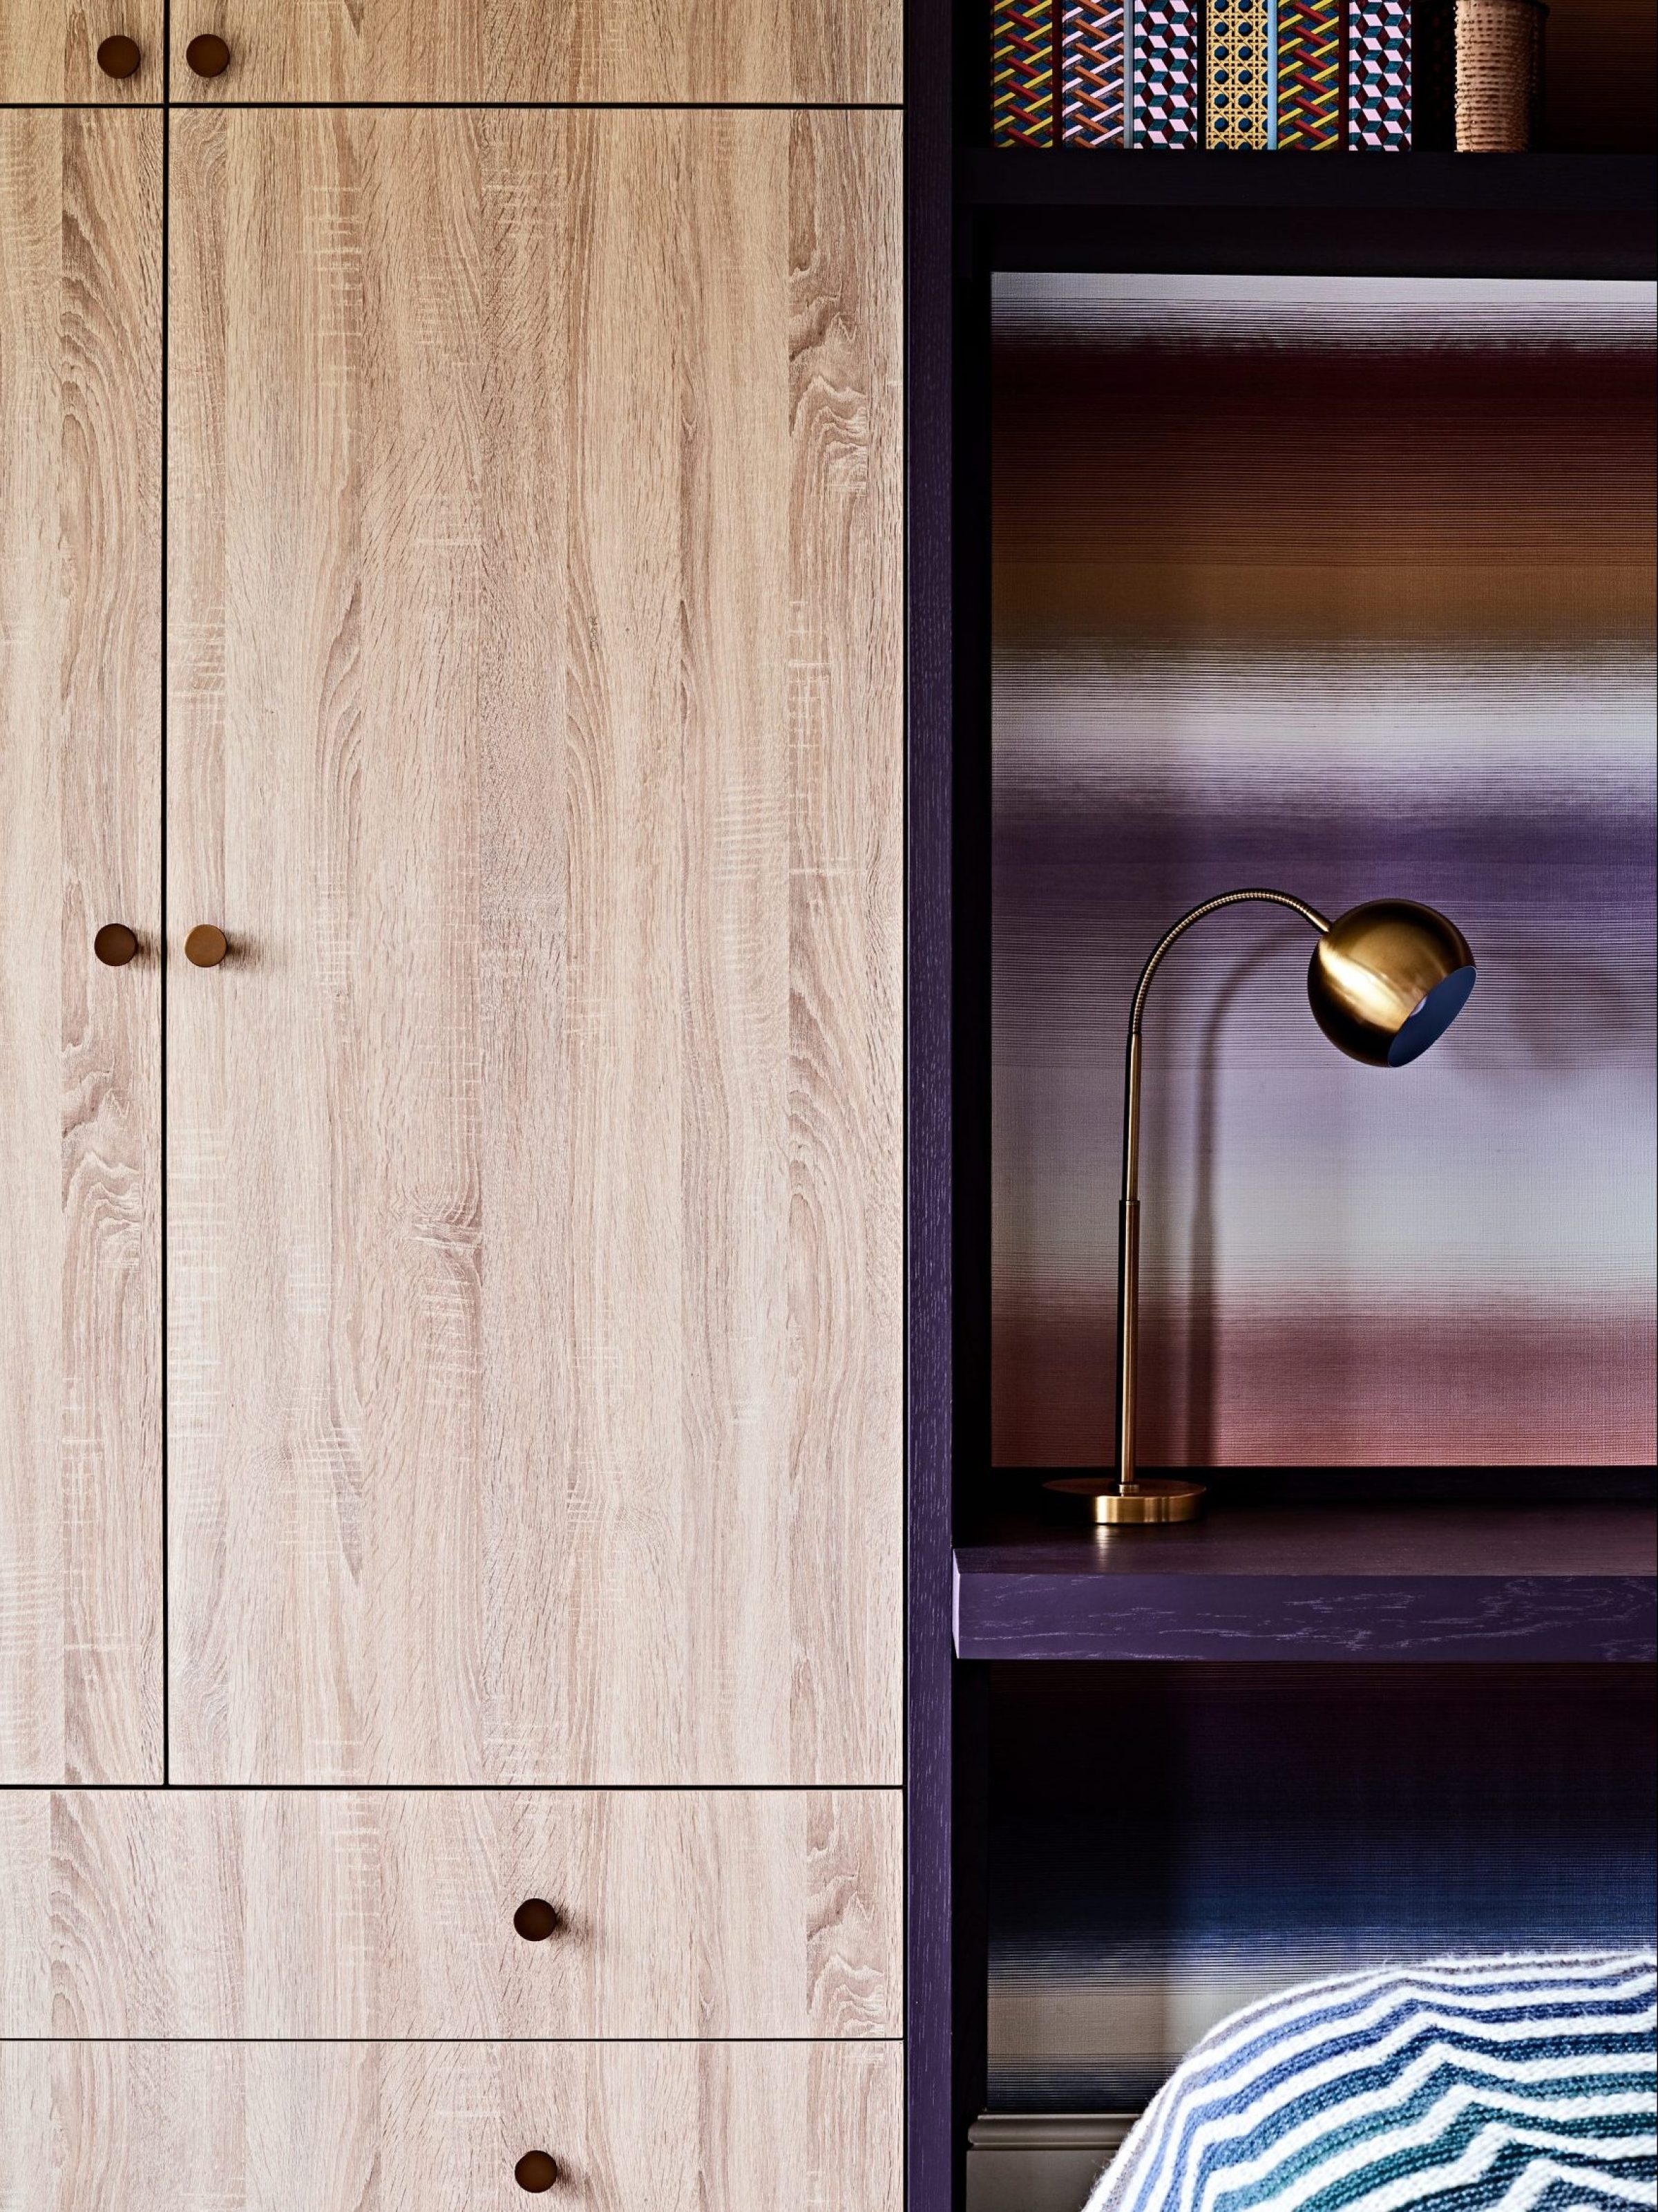 Wardrobe Joinery Details